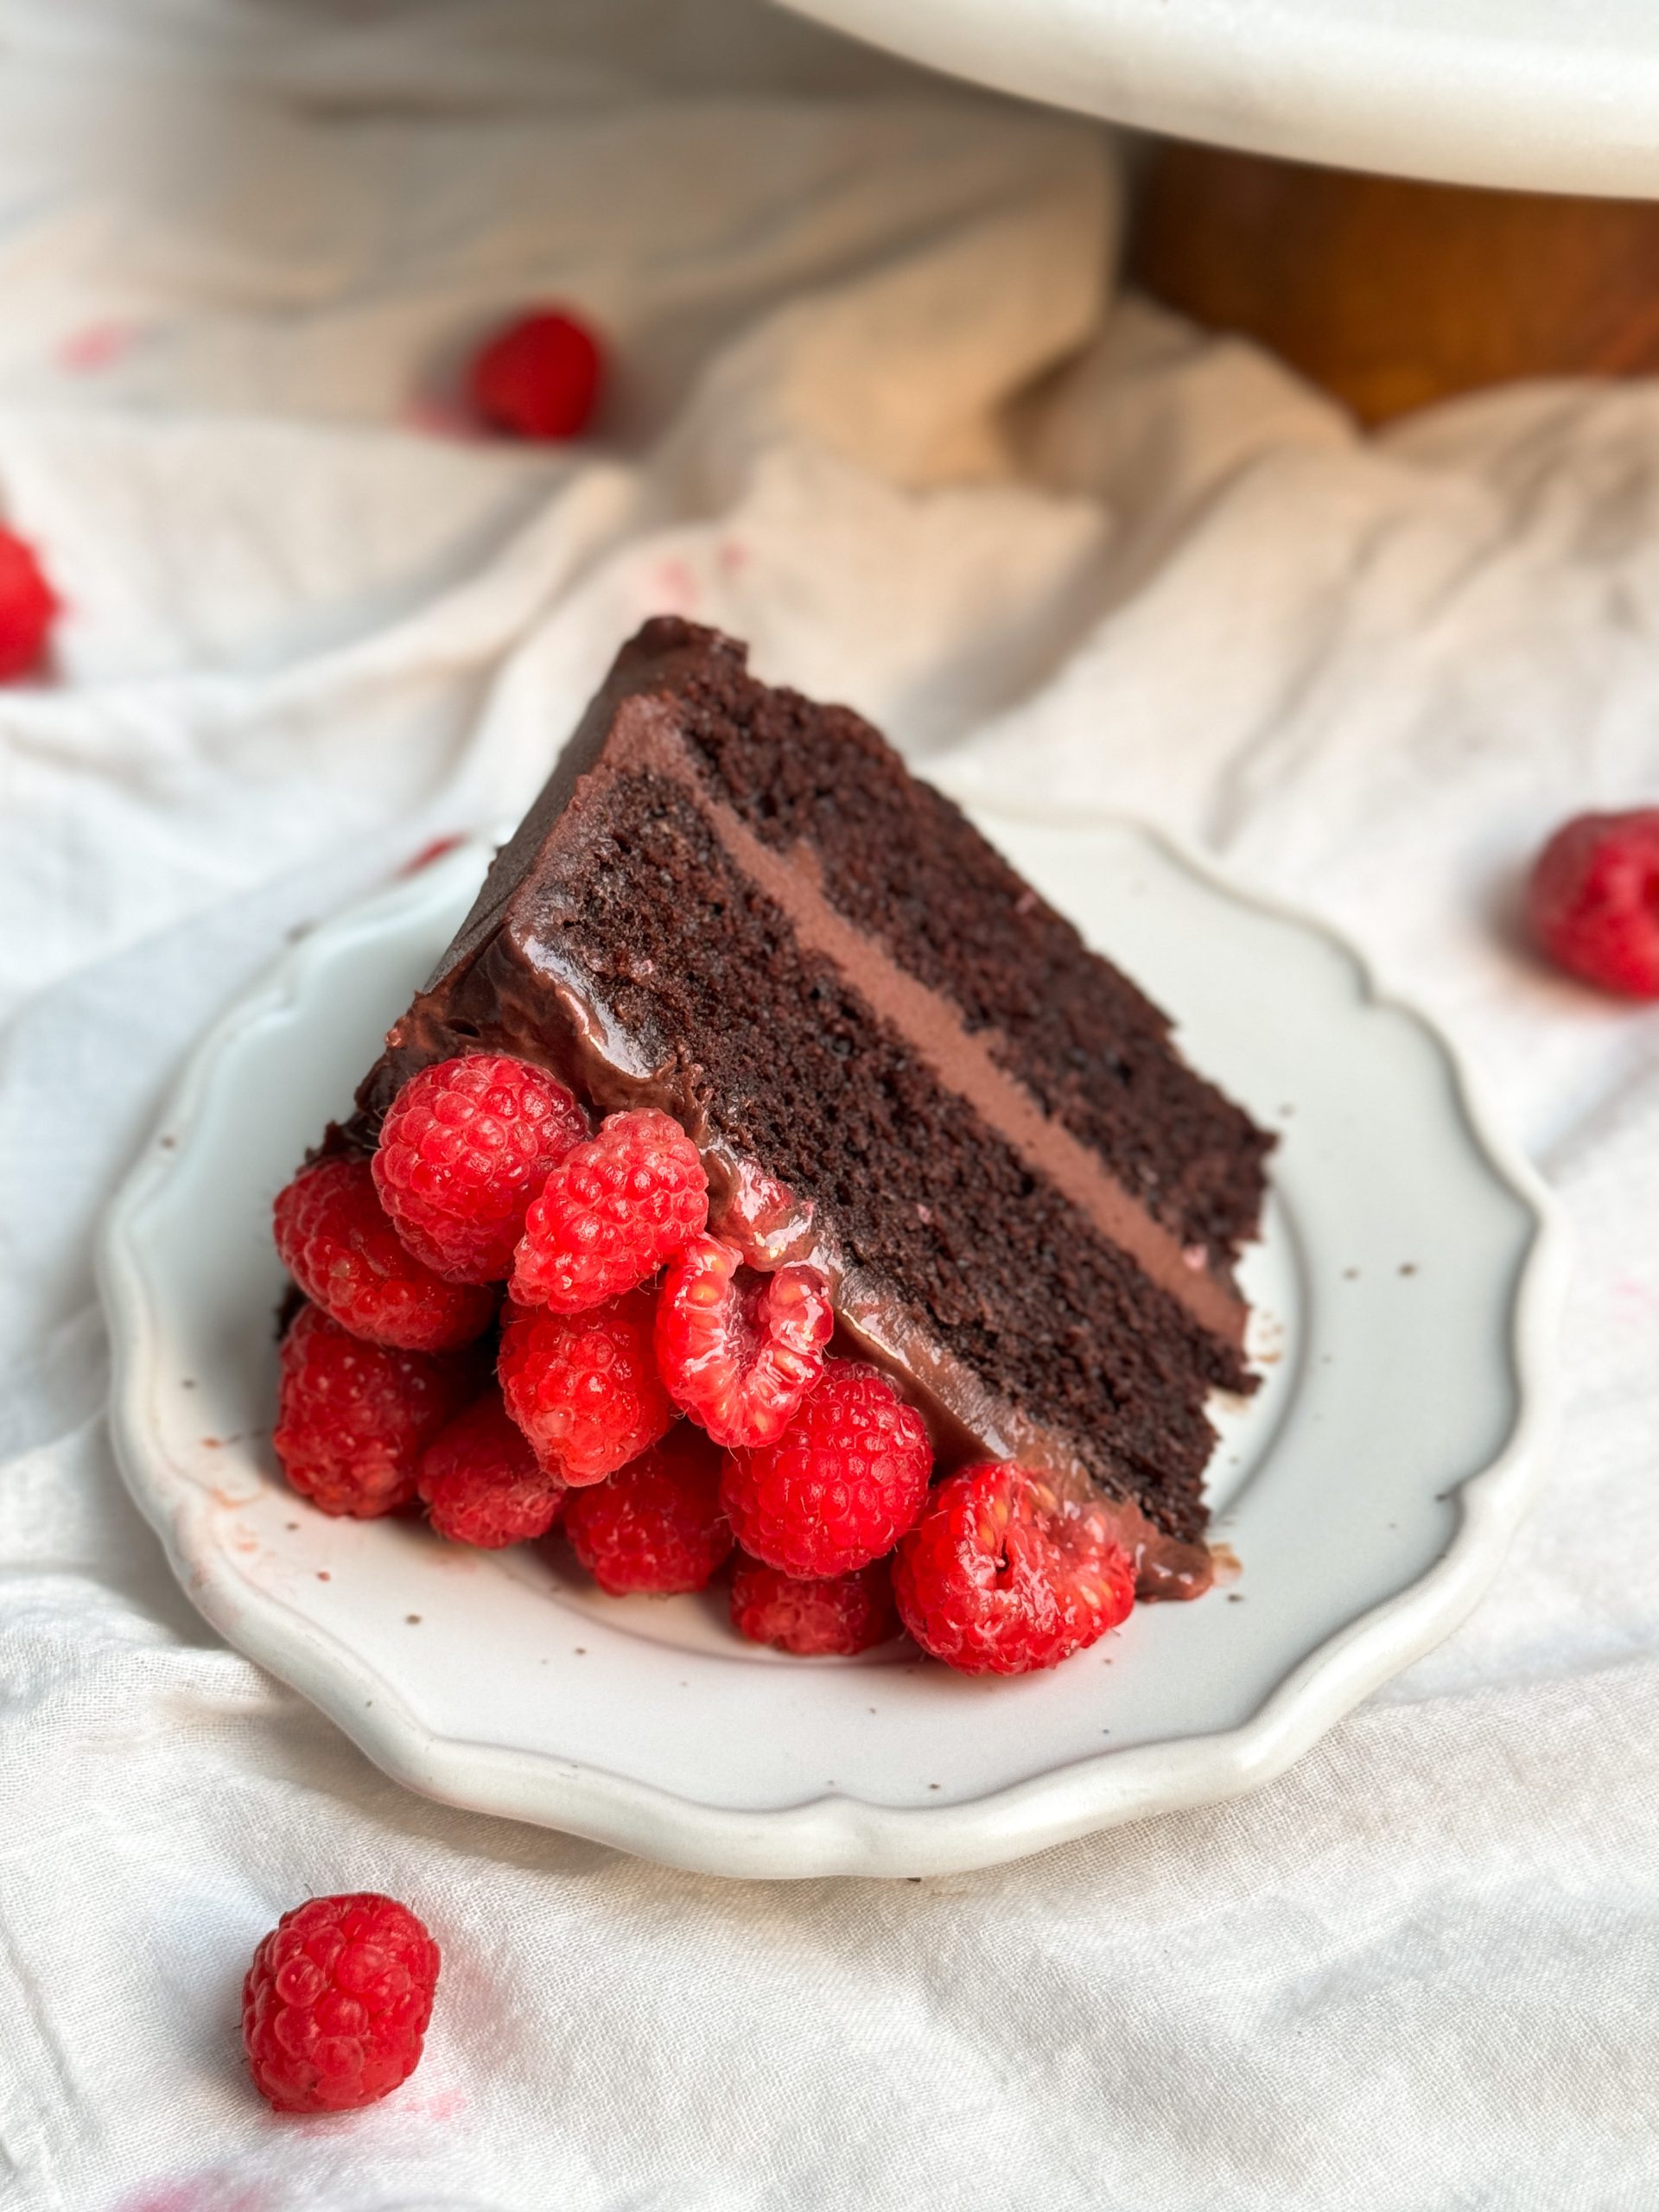 A slice of chocolate raspberry fudge cake on a small plate. cake has 2 layers of moist chocolate cake, ganache in between and on top, and is decorated with raspberries. picture from an angle